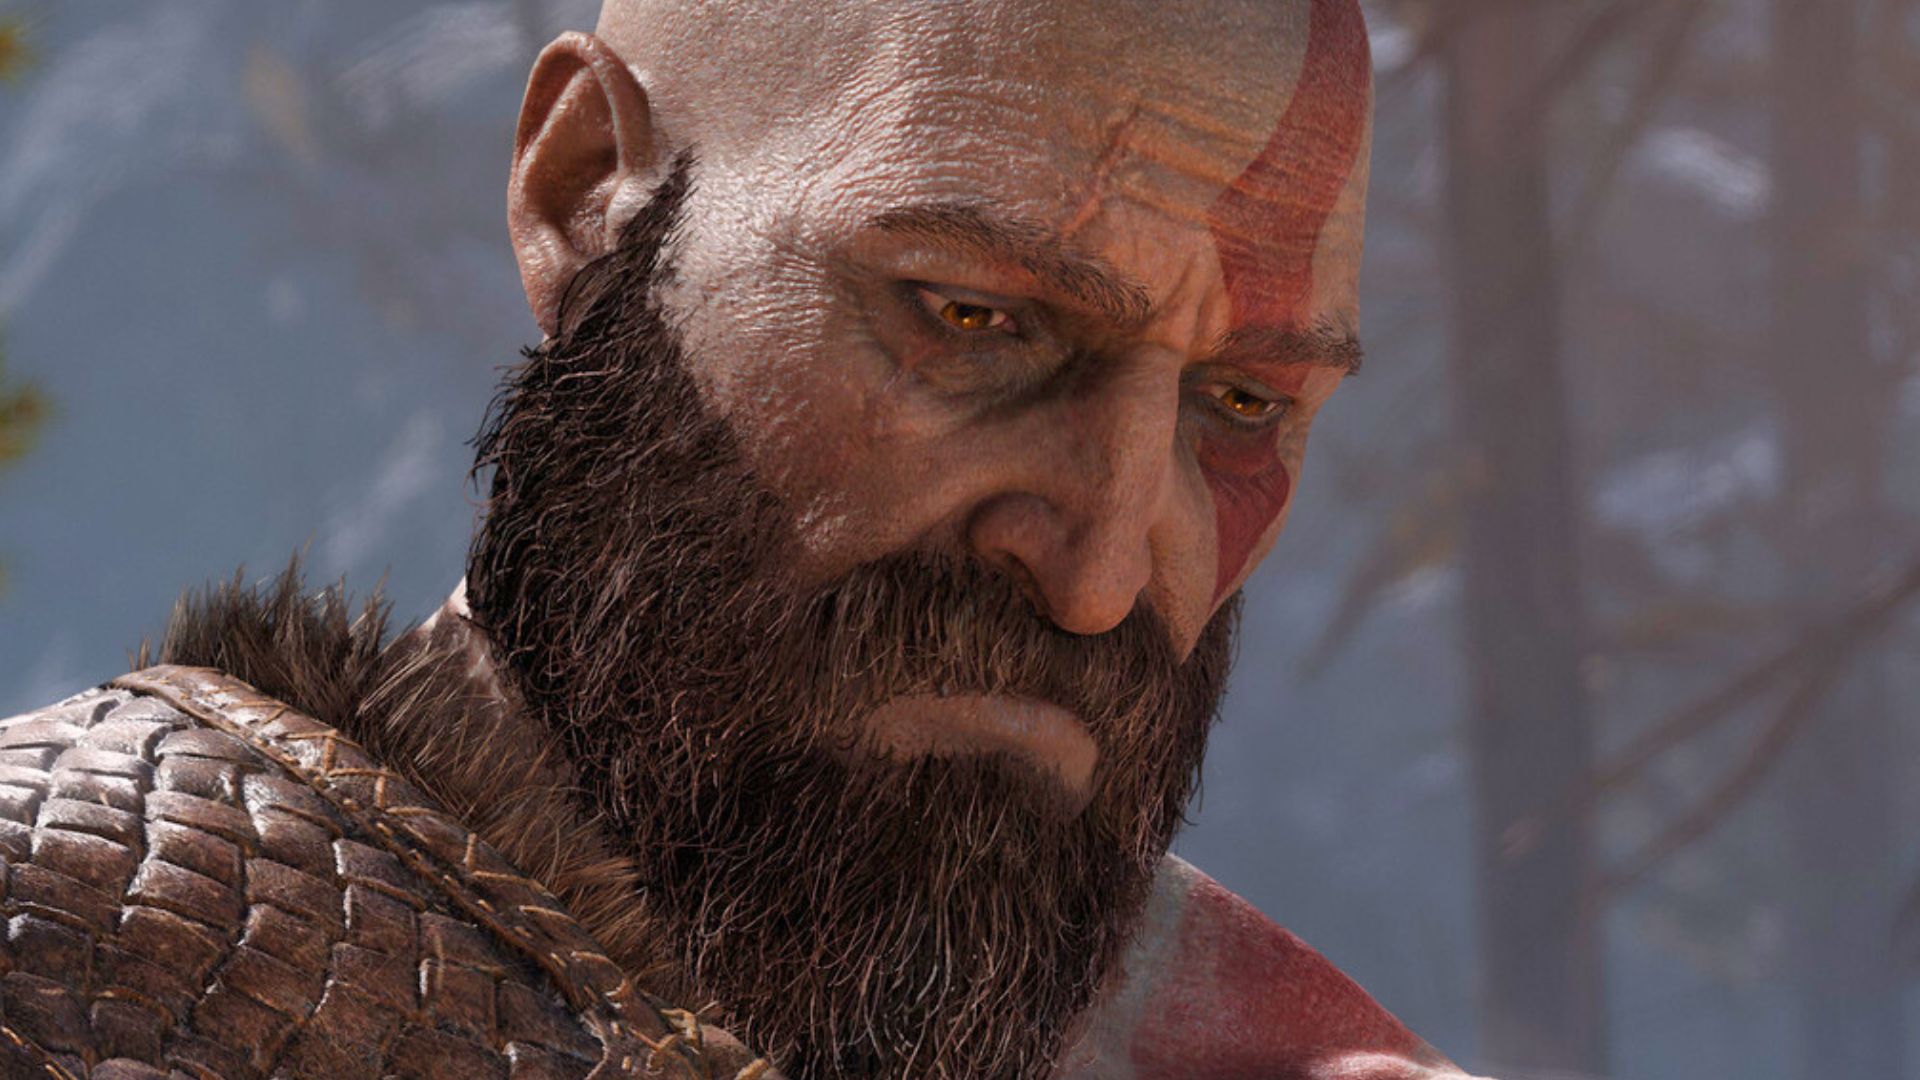 God of War is now half price and totally DRM free